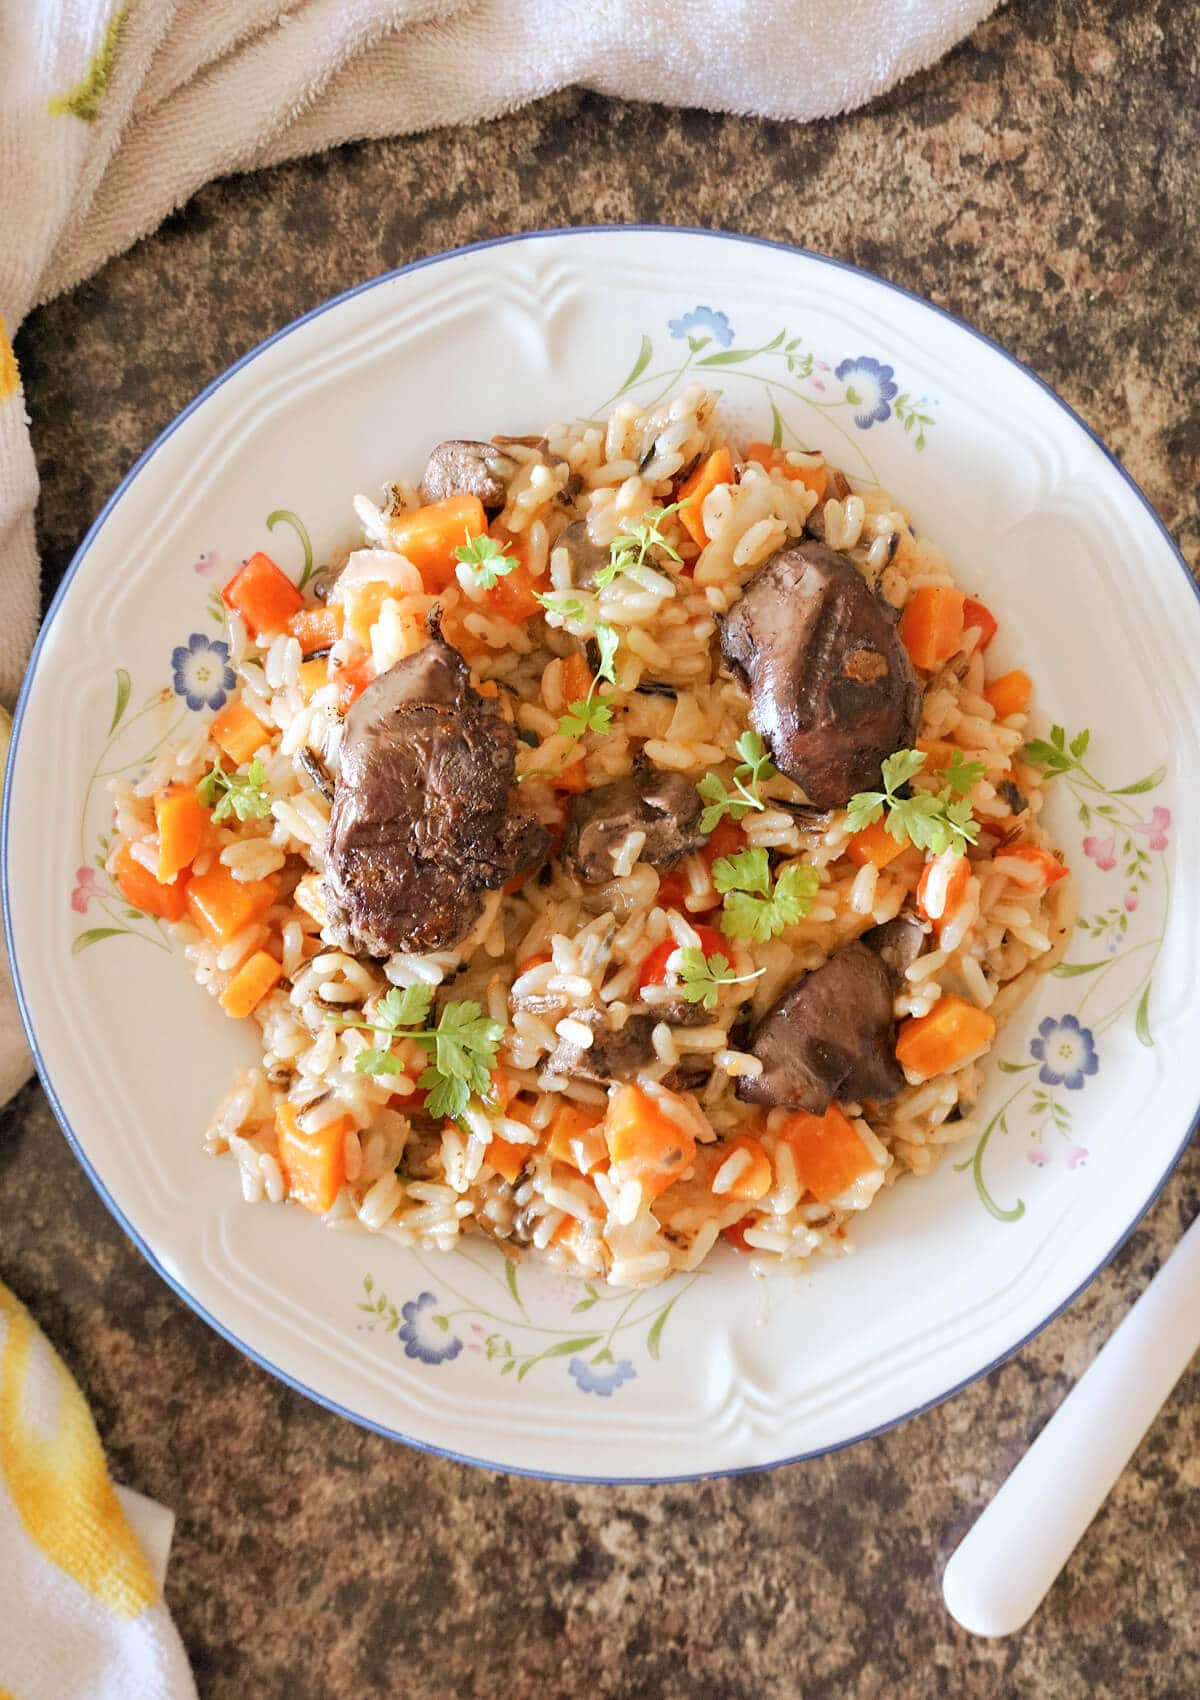 Overhead shot of a white plate with pilaf with vegetables and chicken liver.